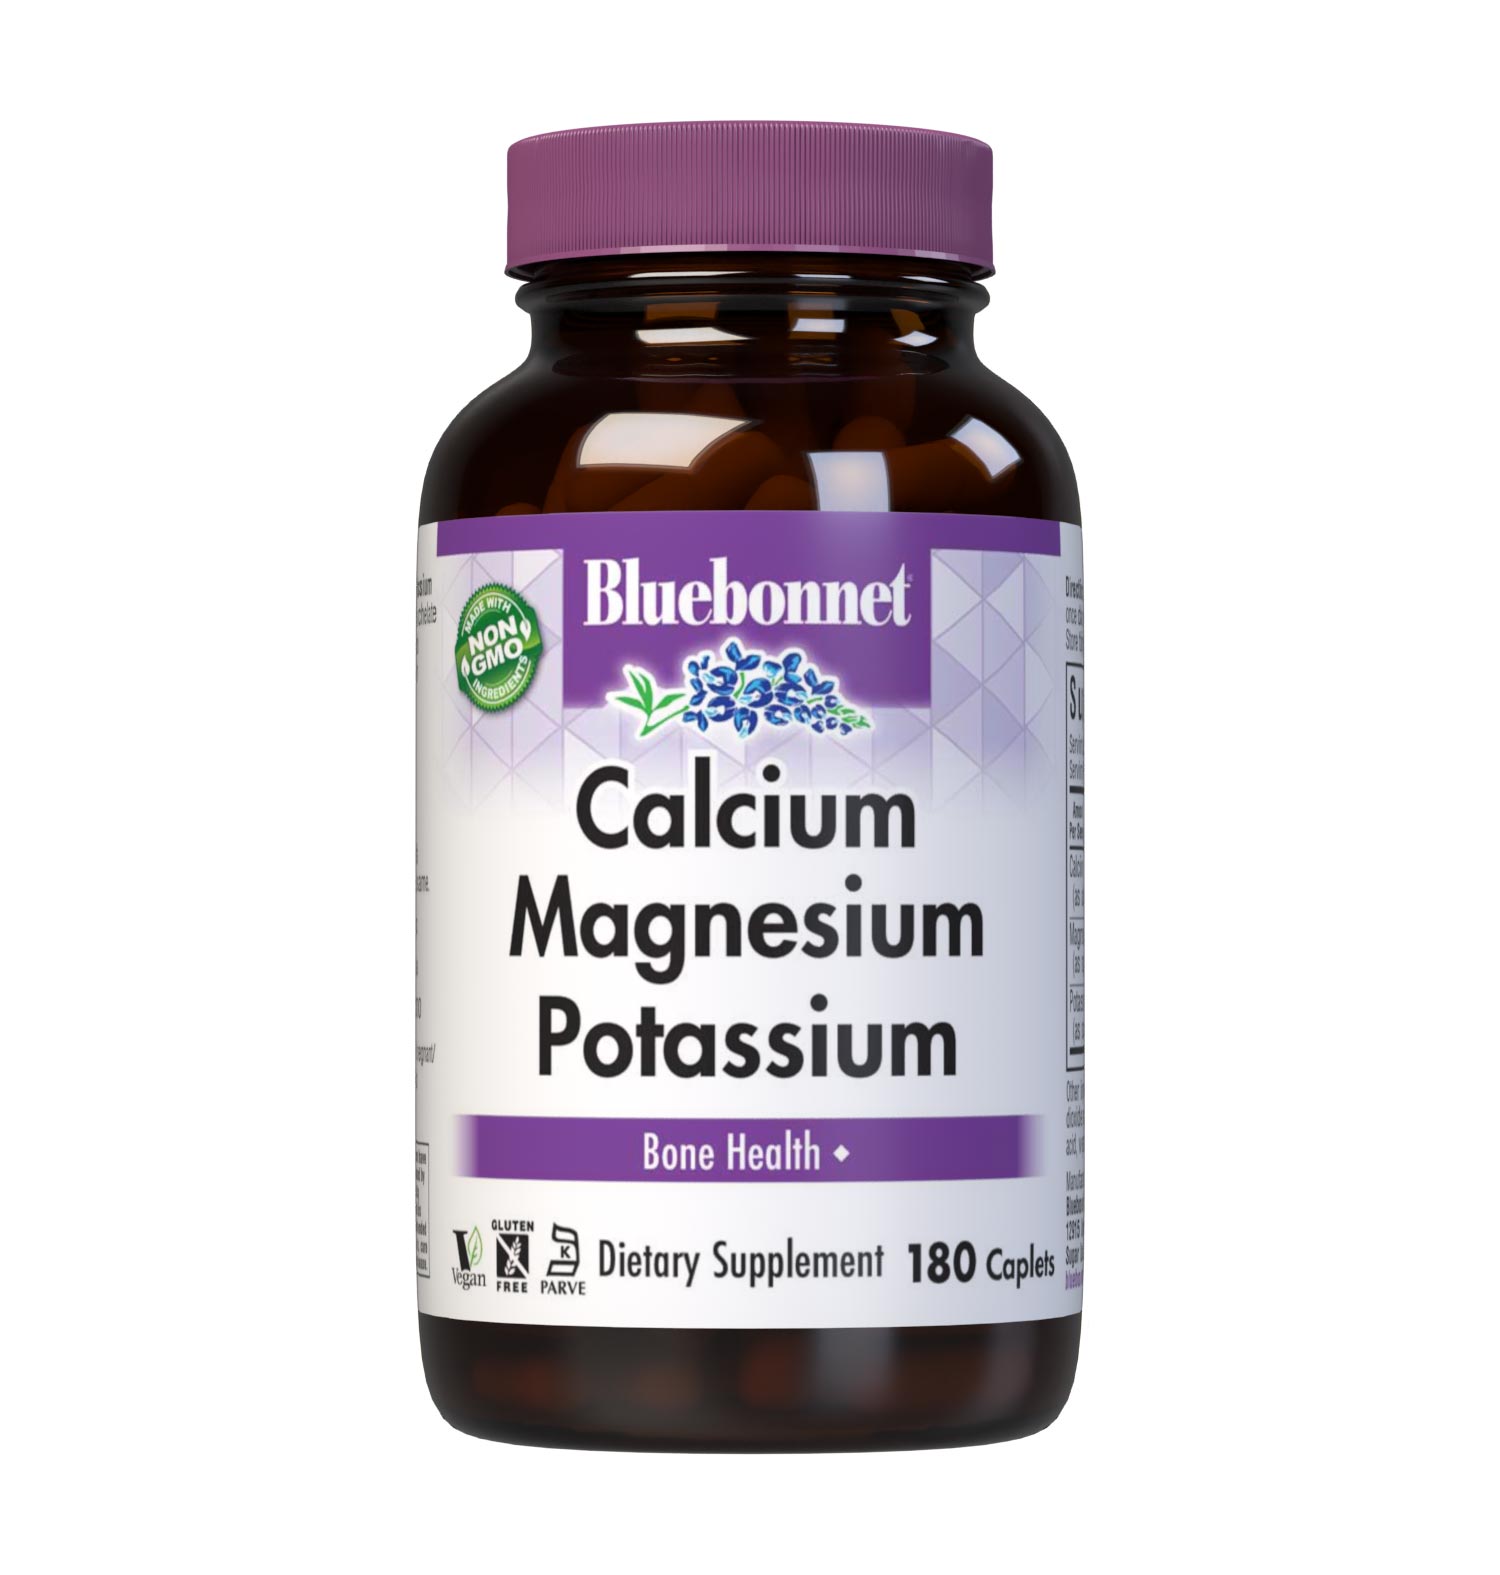 Bluebonnet's Calcium Magnesium Potassium 180 Caplets are formulated with calcium in a chelate of calcium citrate along with fully reacted magnesium and potassium aspartate for strong, healthy bones.  #size_180 count